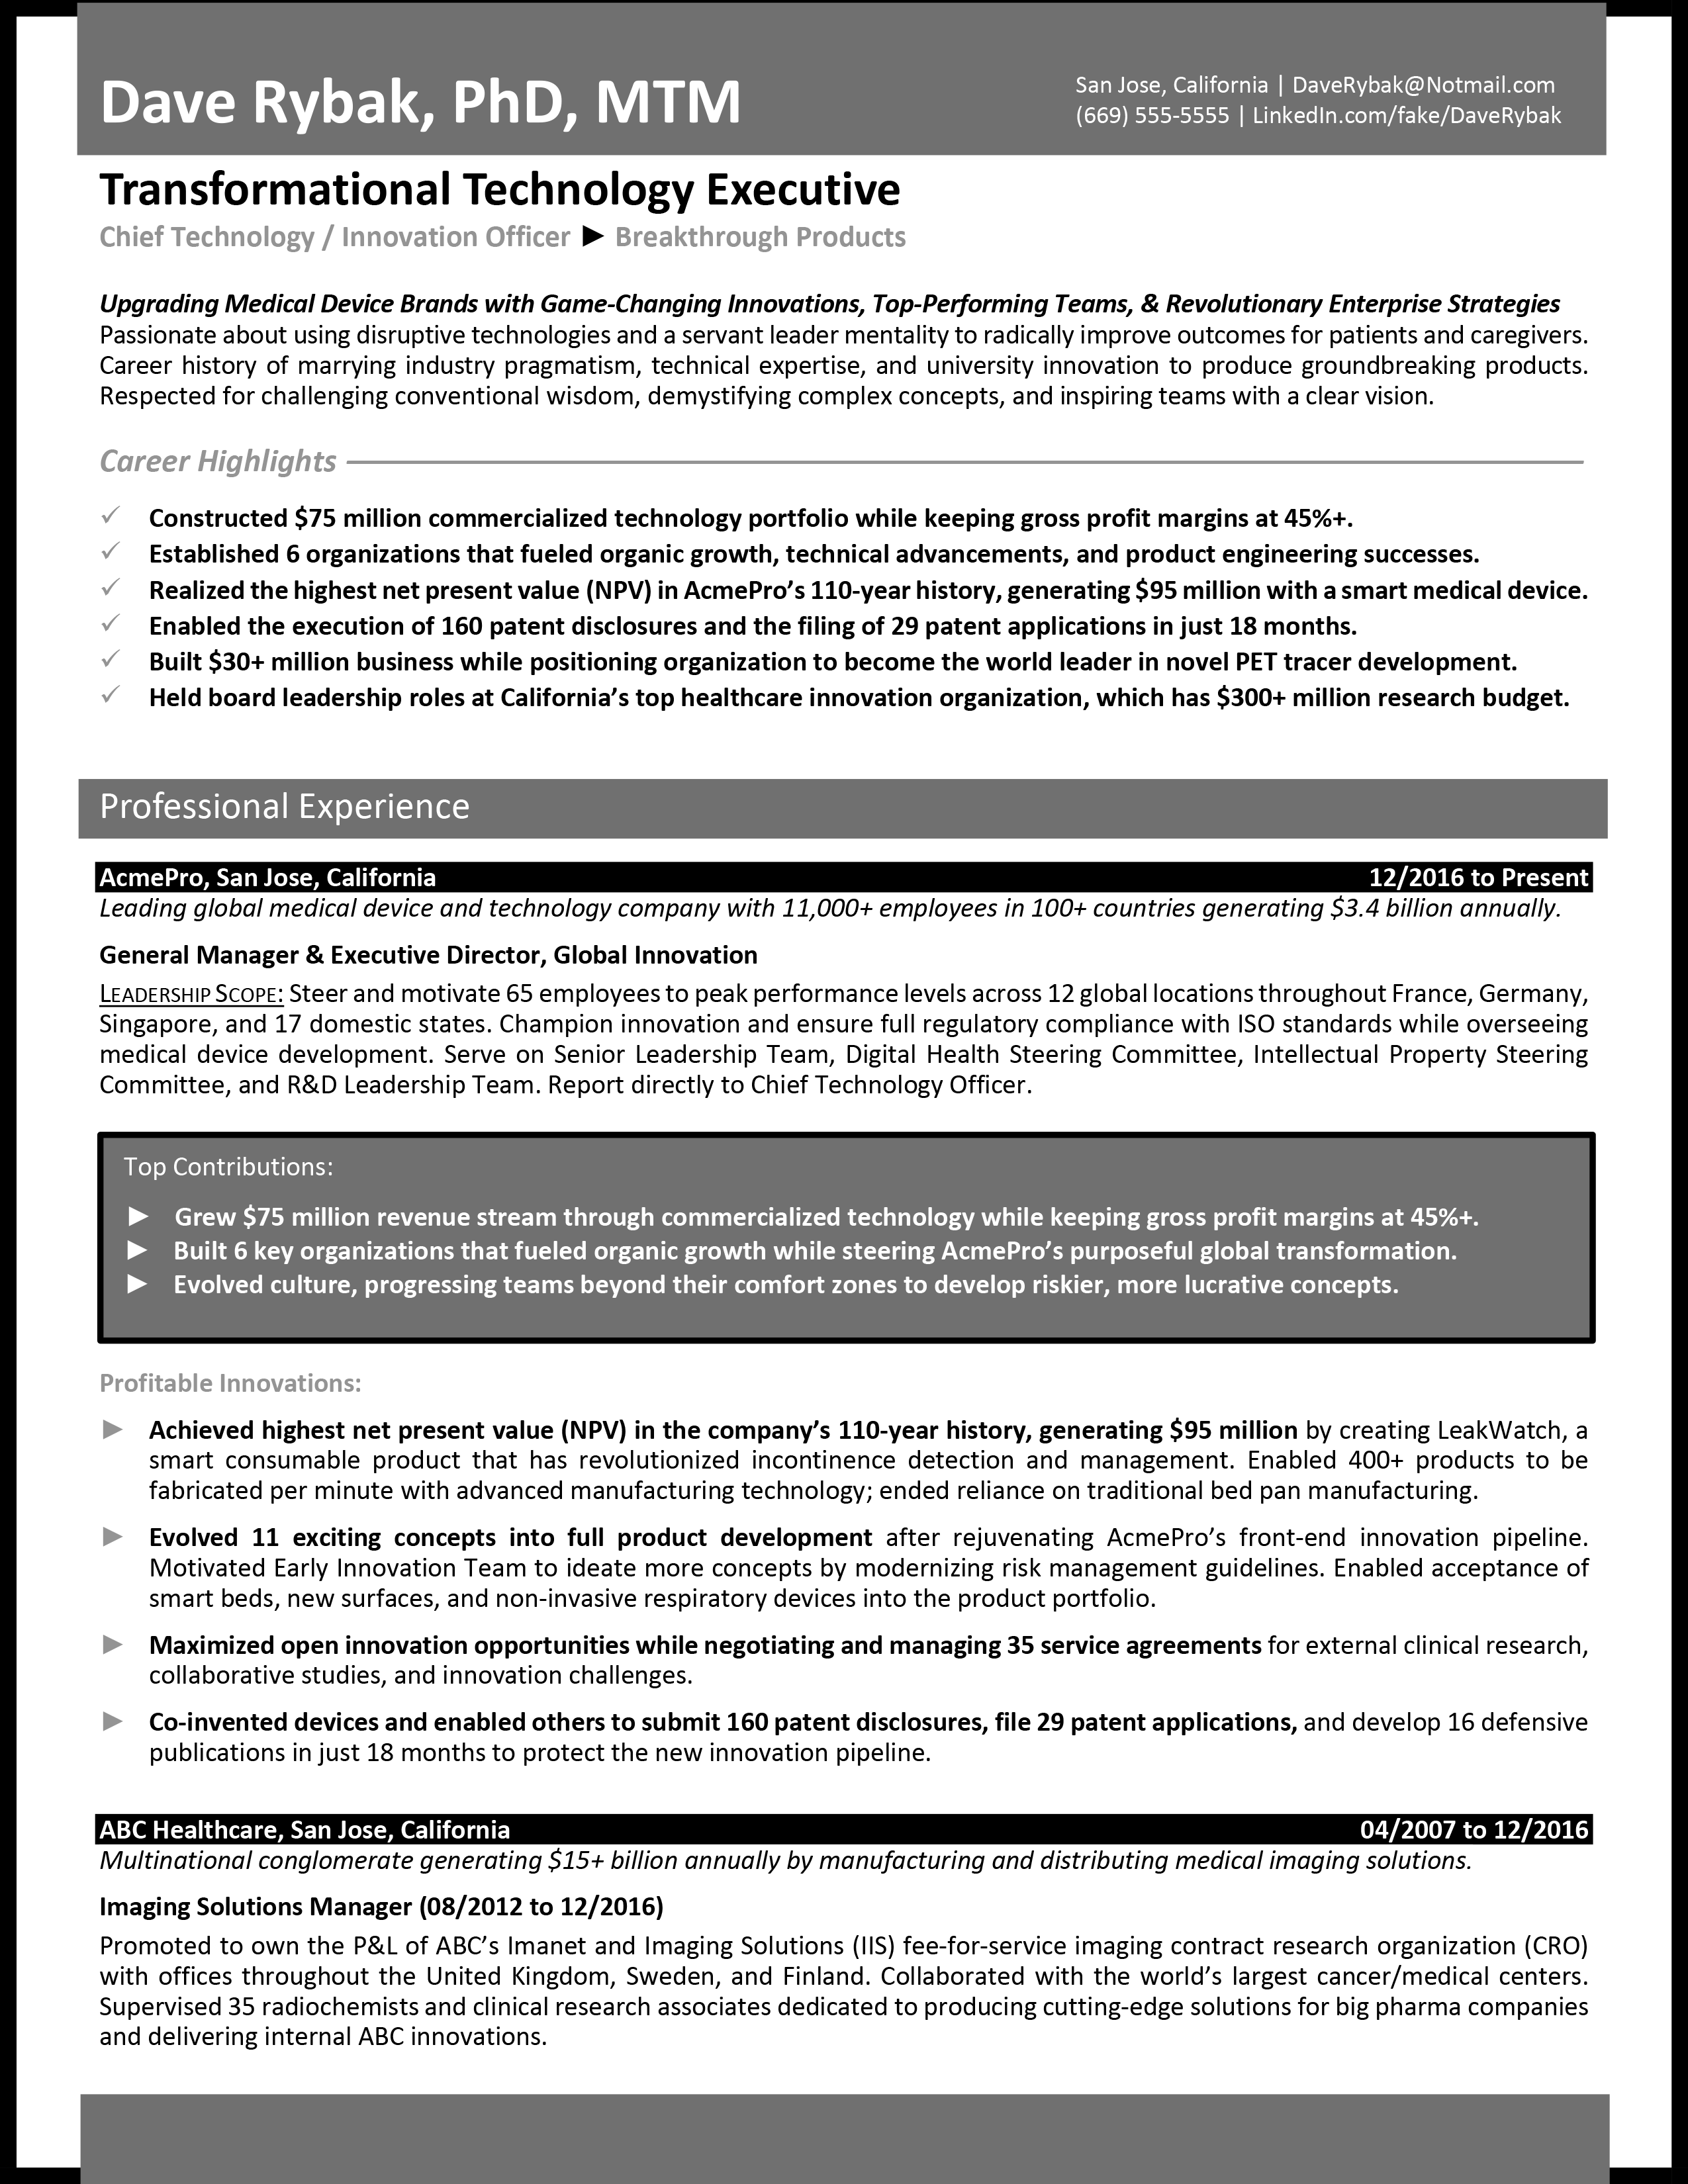 Chief Technology Innovation Officer Resume Sample